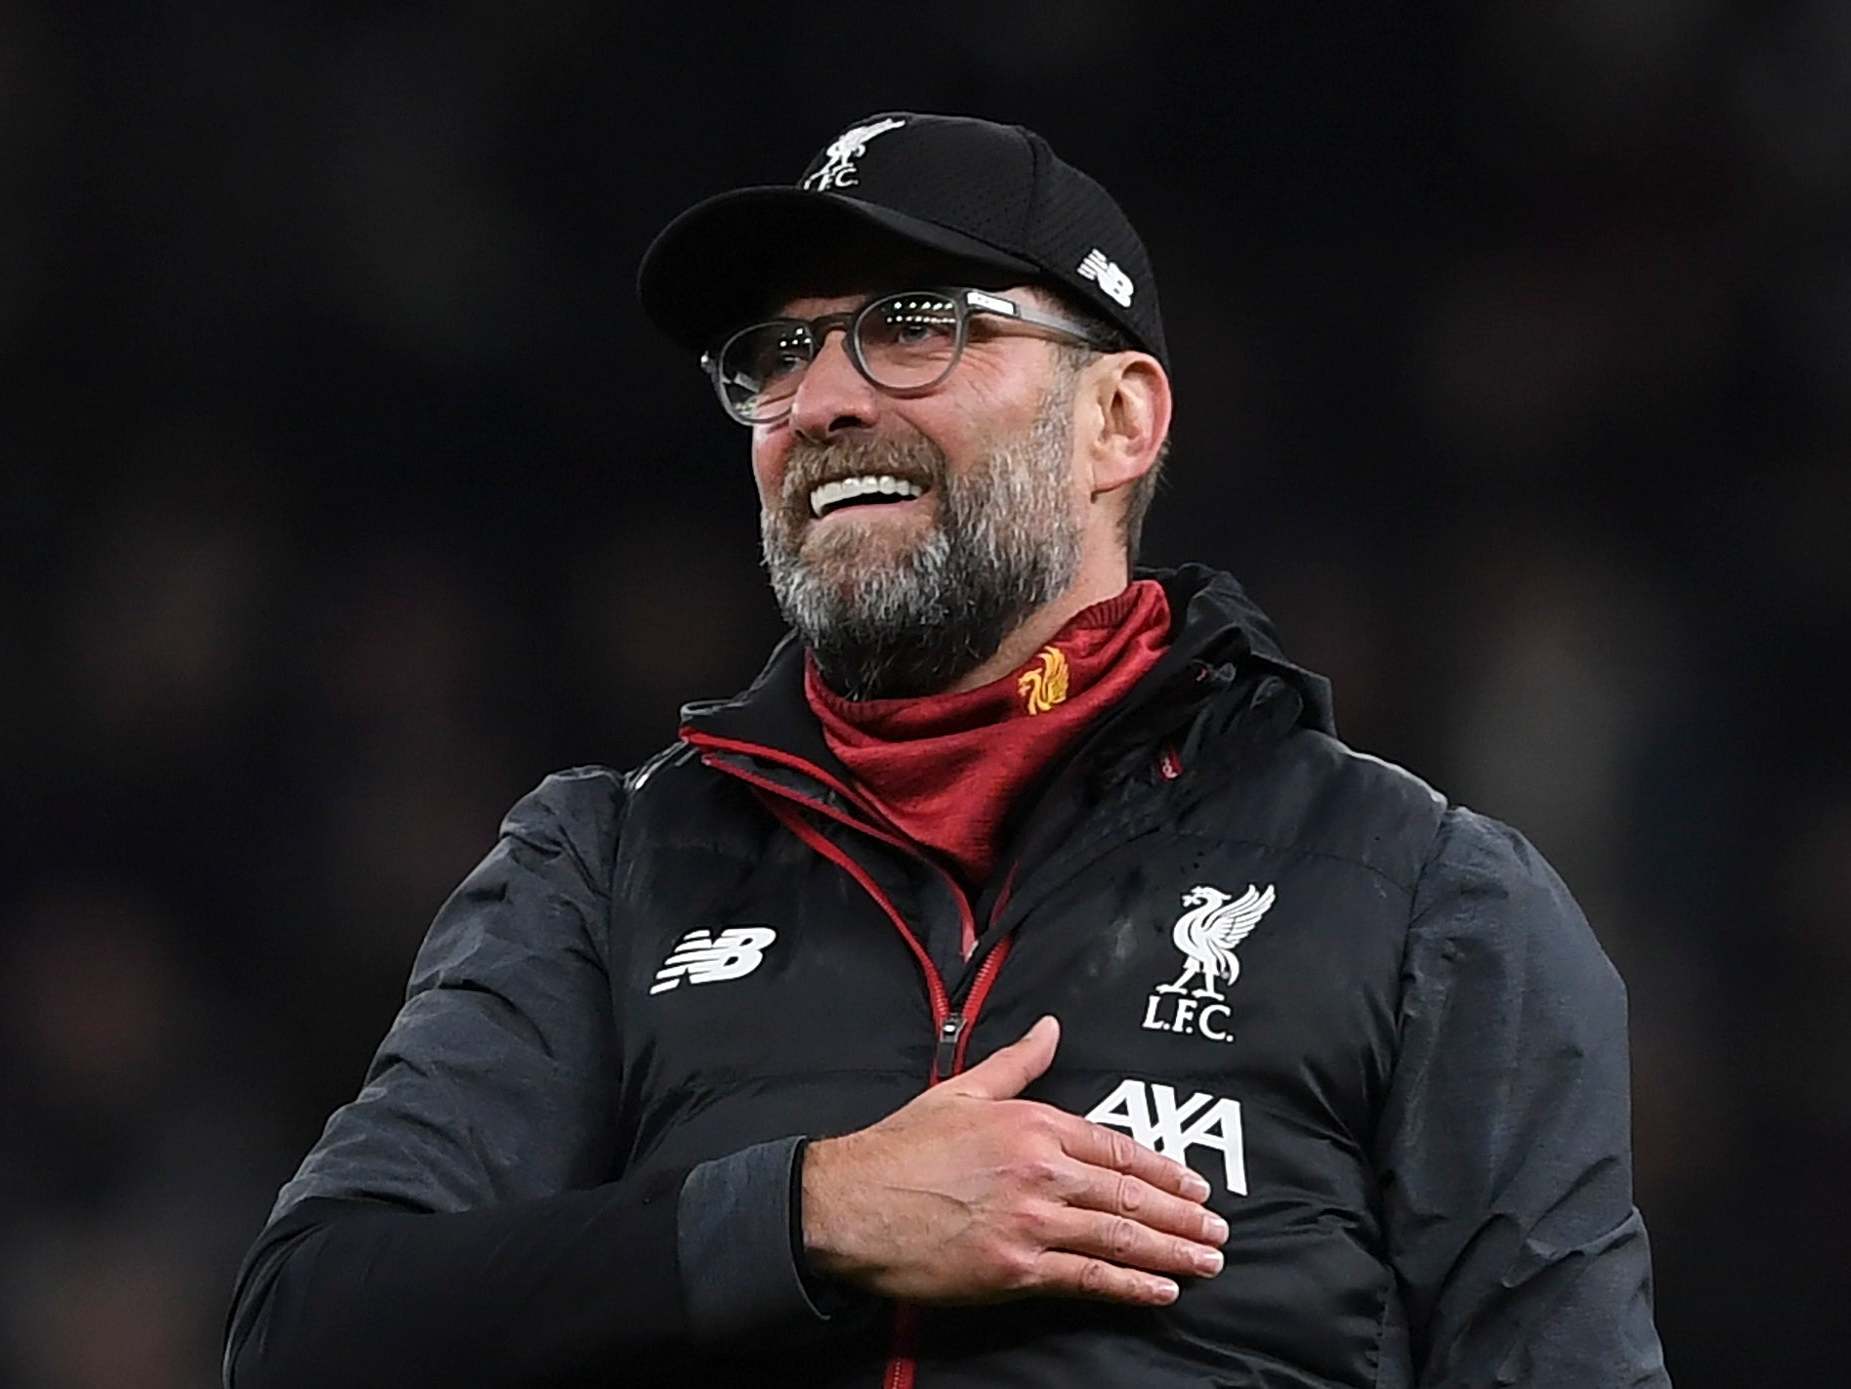 Jurgen Klopp was a relieved man with the win over Spurs